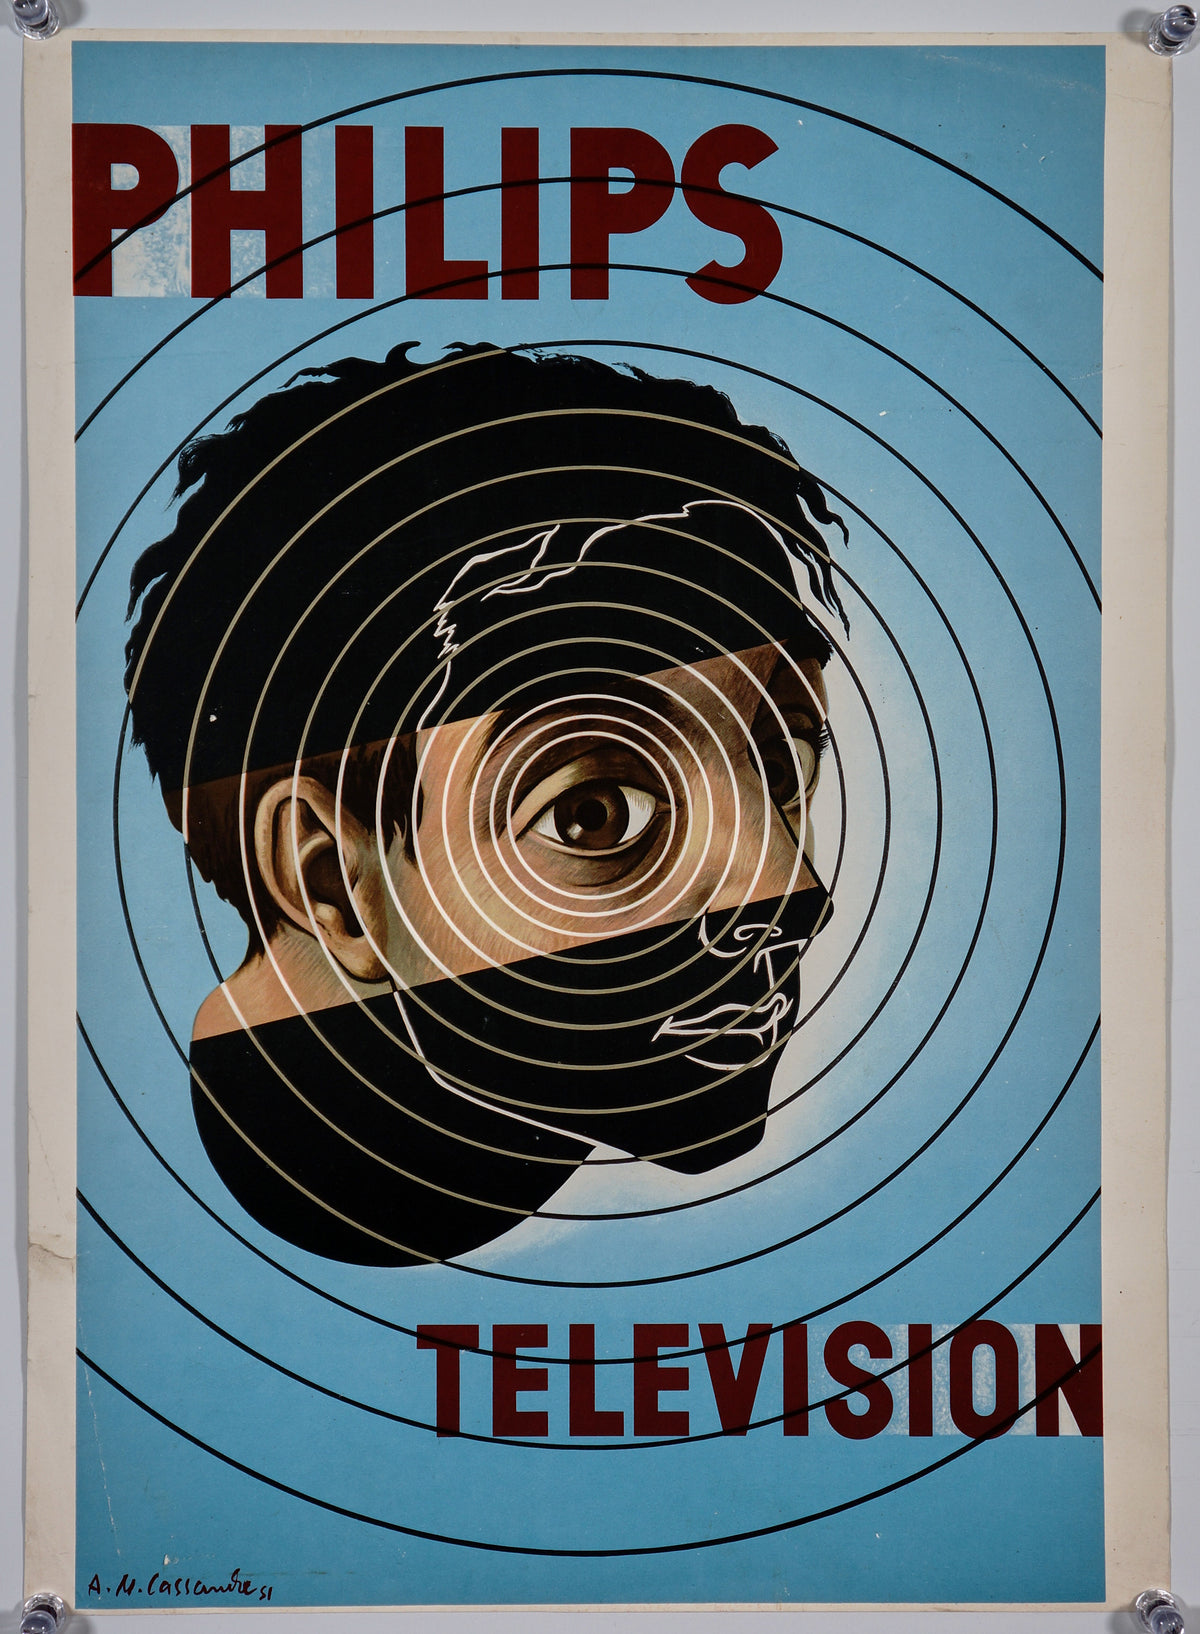 Philips Television by A.M. Cassandre - Authentic Vintage Window Card